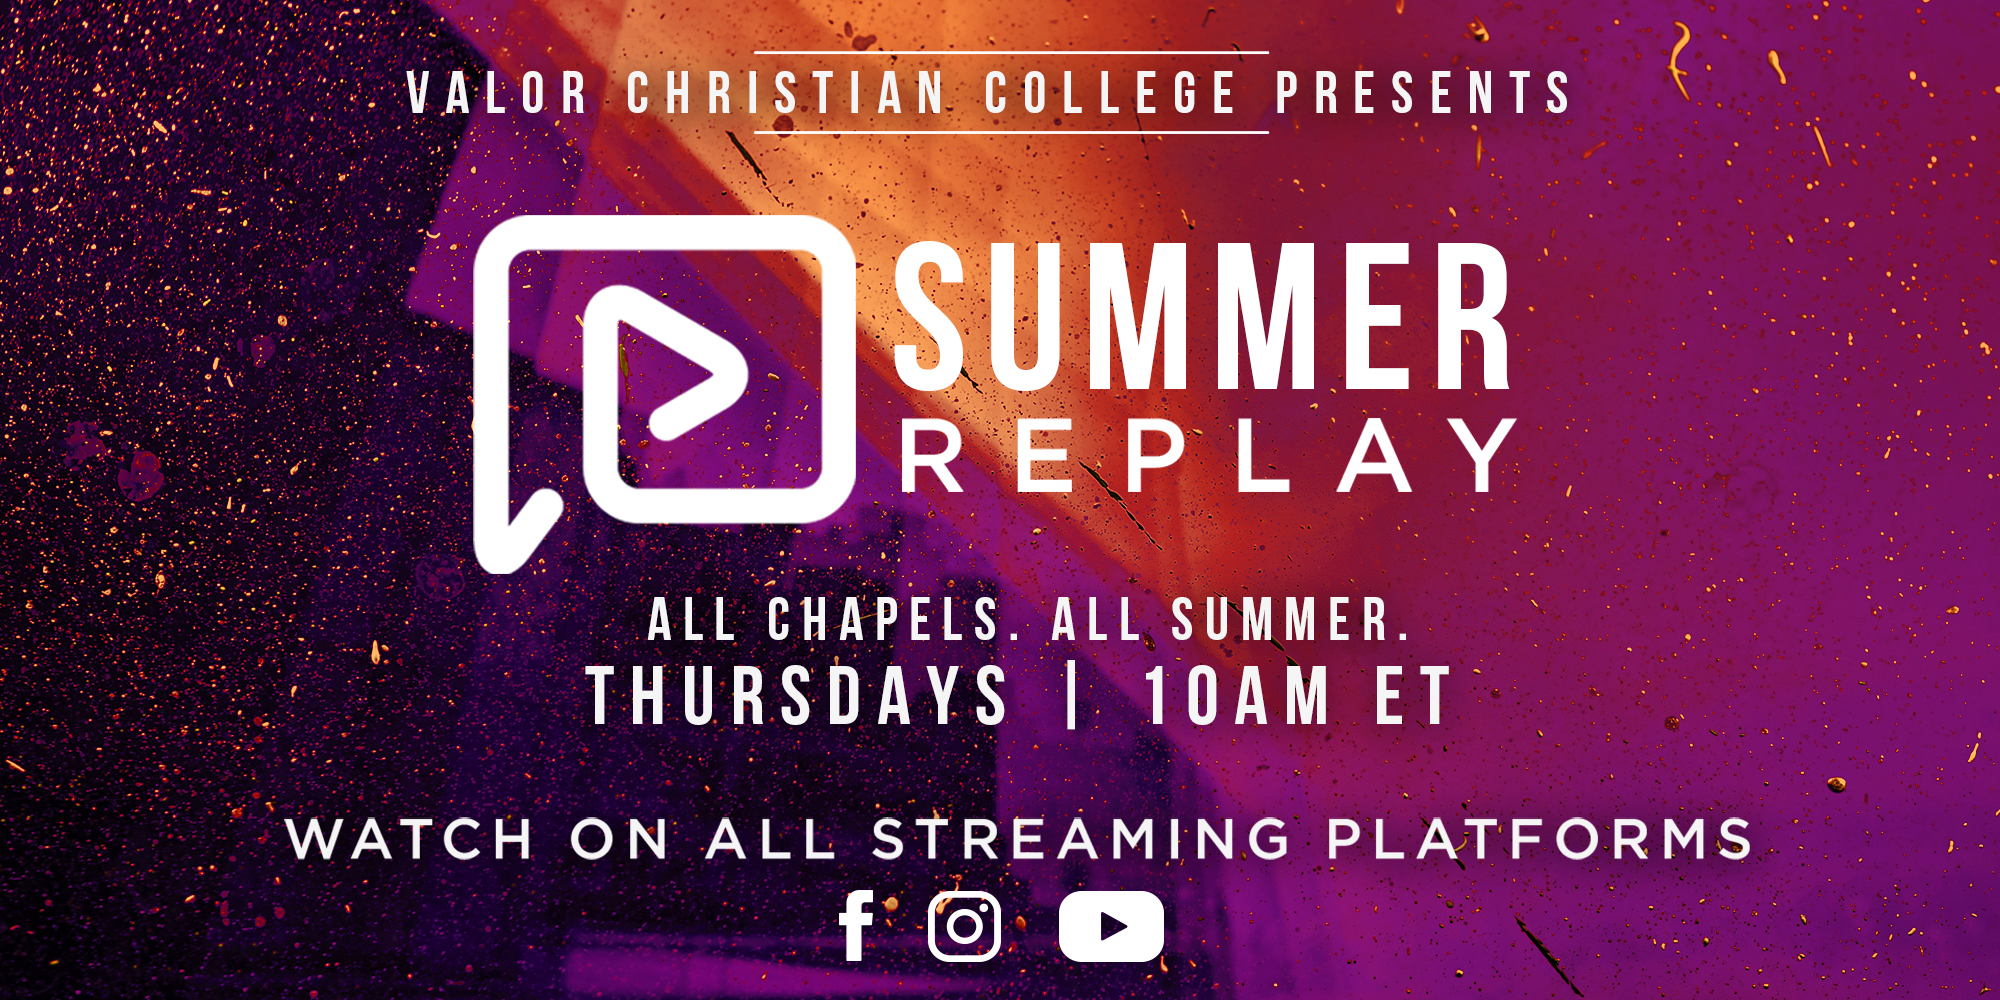 Valor Christian College Presents Summer Replay All Chapels. All Summer. Thursdays 10AM ET Watch on All Streaming Platforms Facebook Instagram Youtube